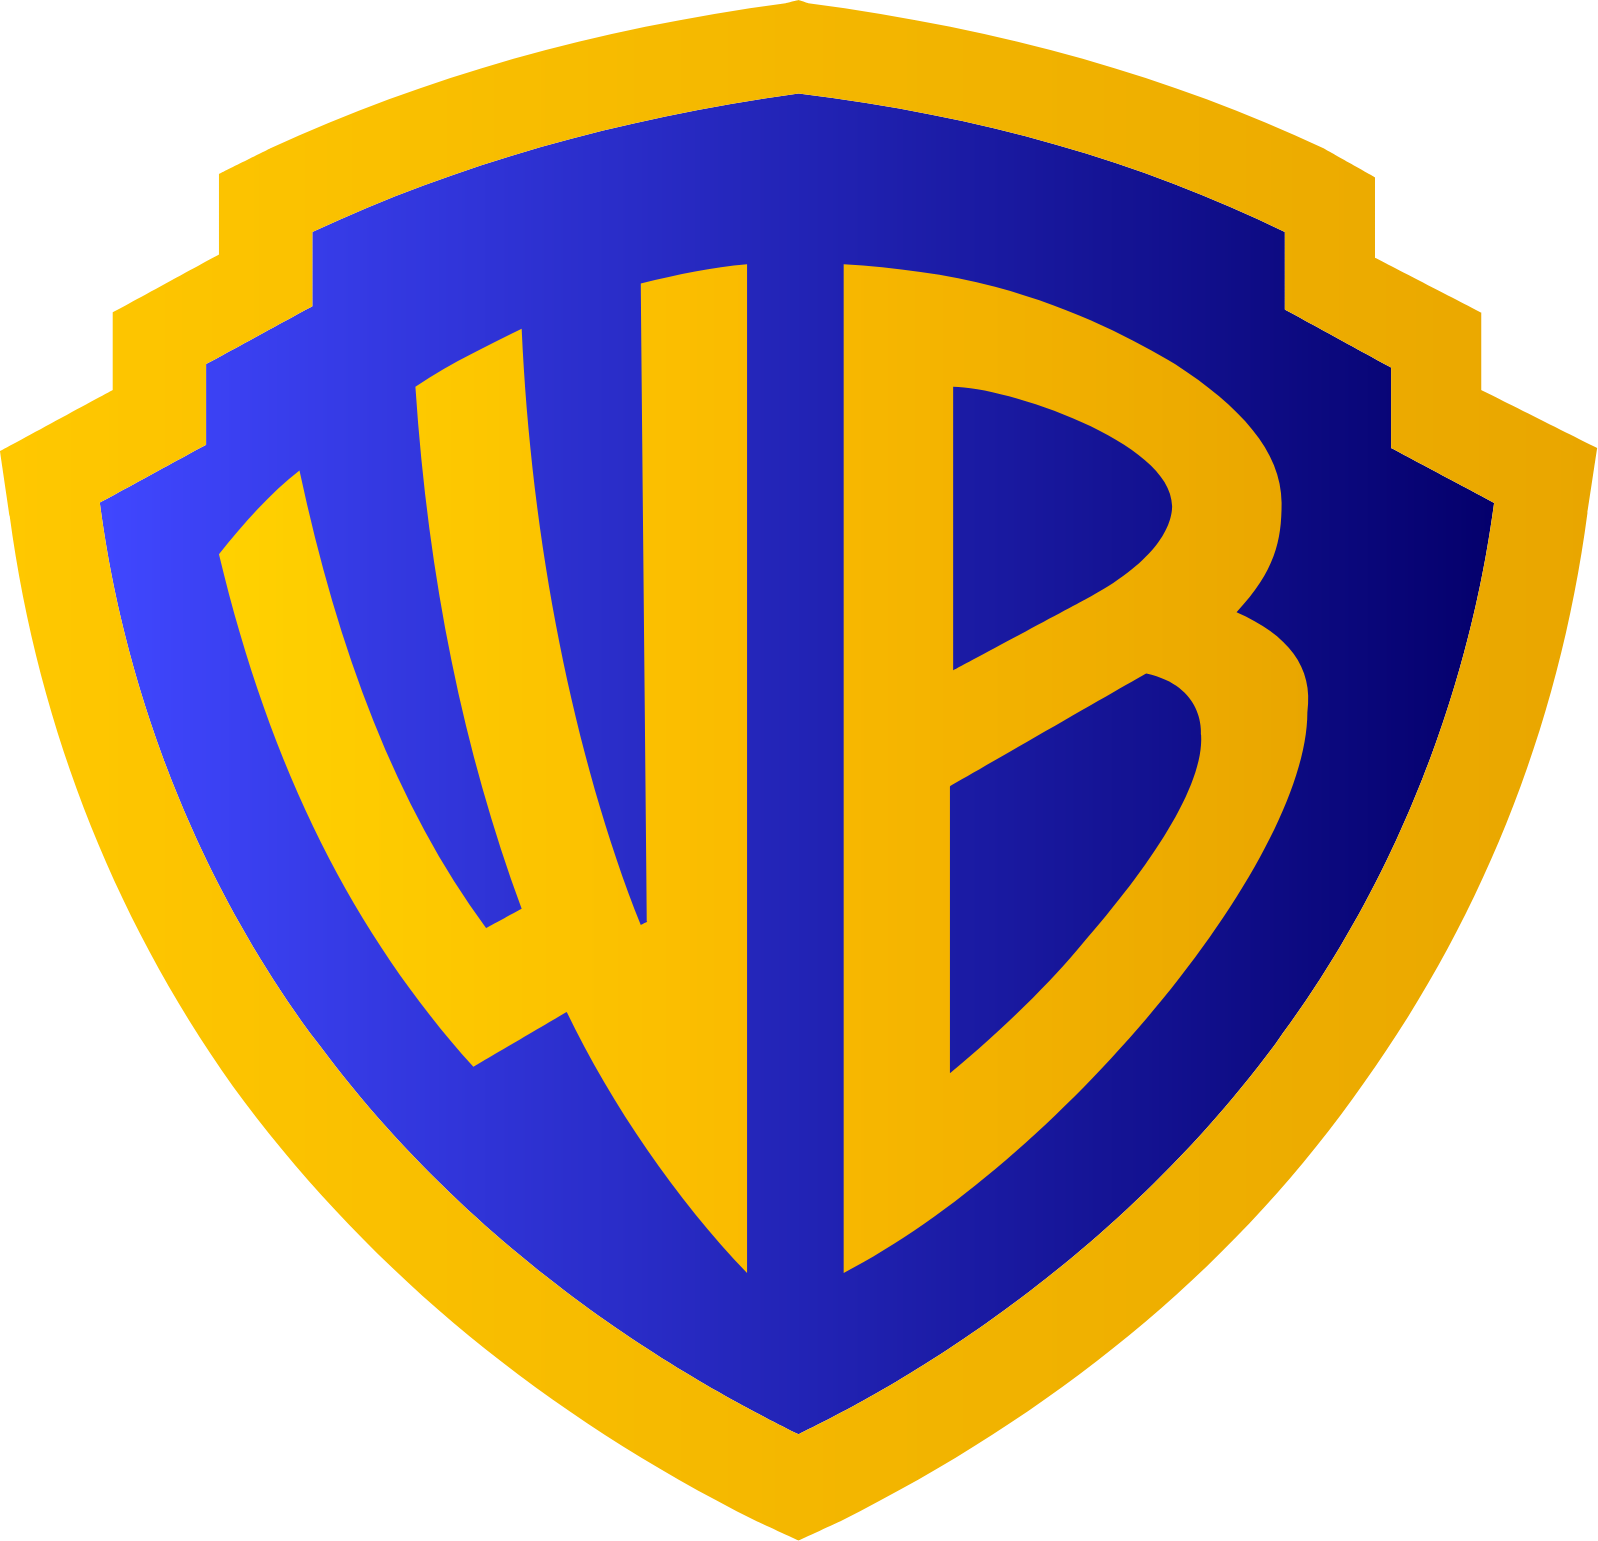 Warner Bros. Discovery logo in transparent PNG and vectorized SVG formats